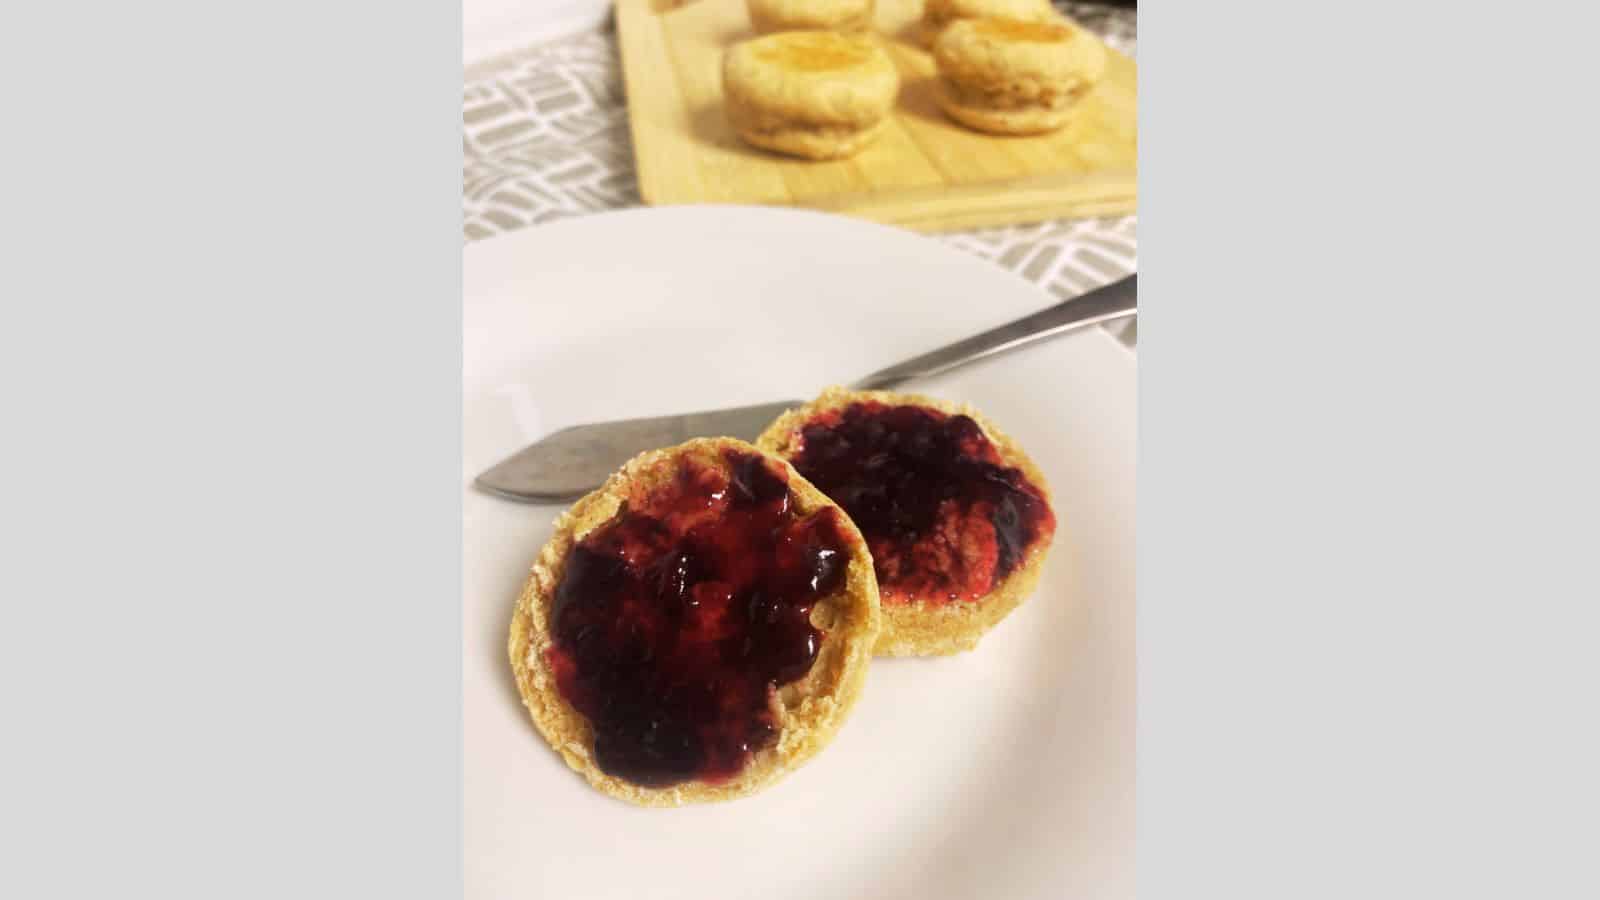 Round scones with jam on white plate.